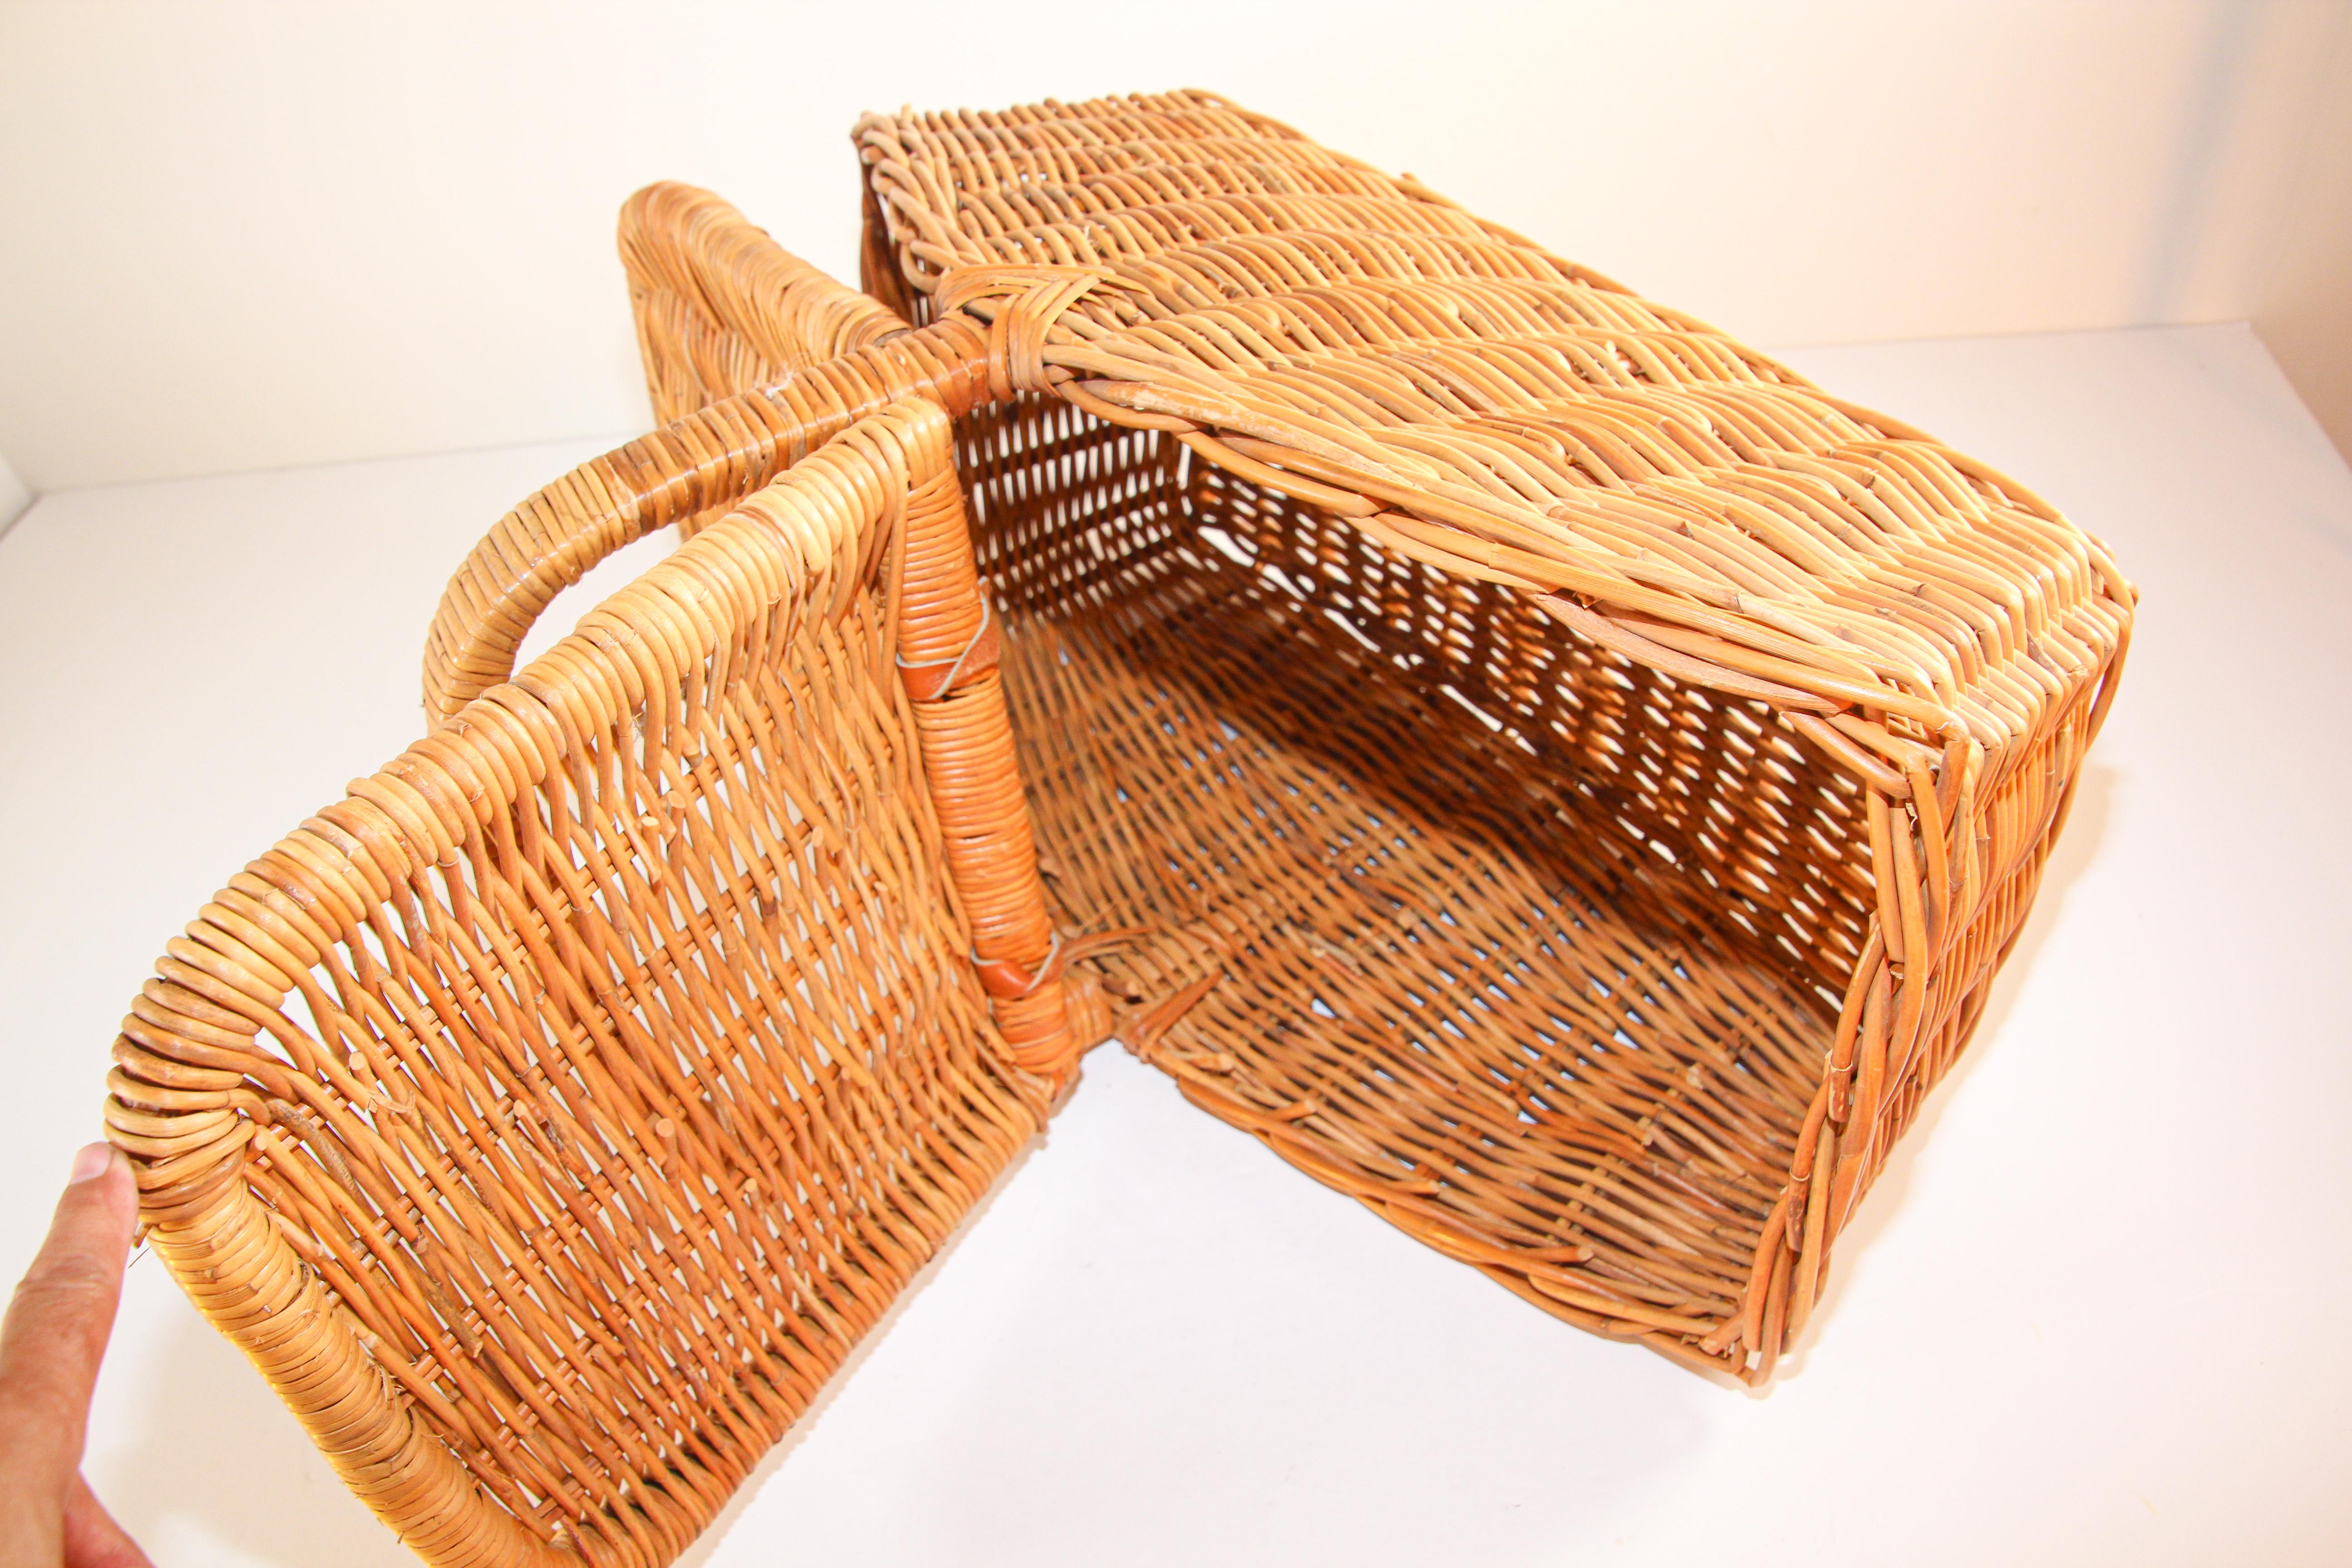 Vintage French Provincial Rattan Lidded Handled Basket In Good Condition For Sale In North Hollywood, CA